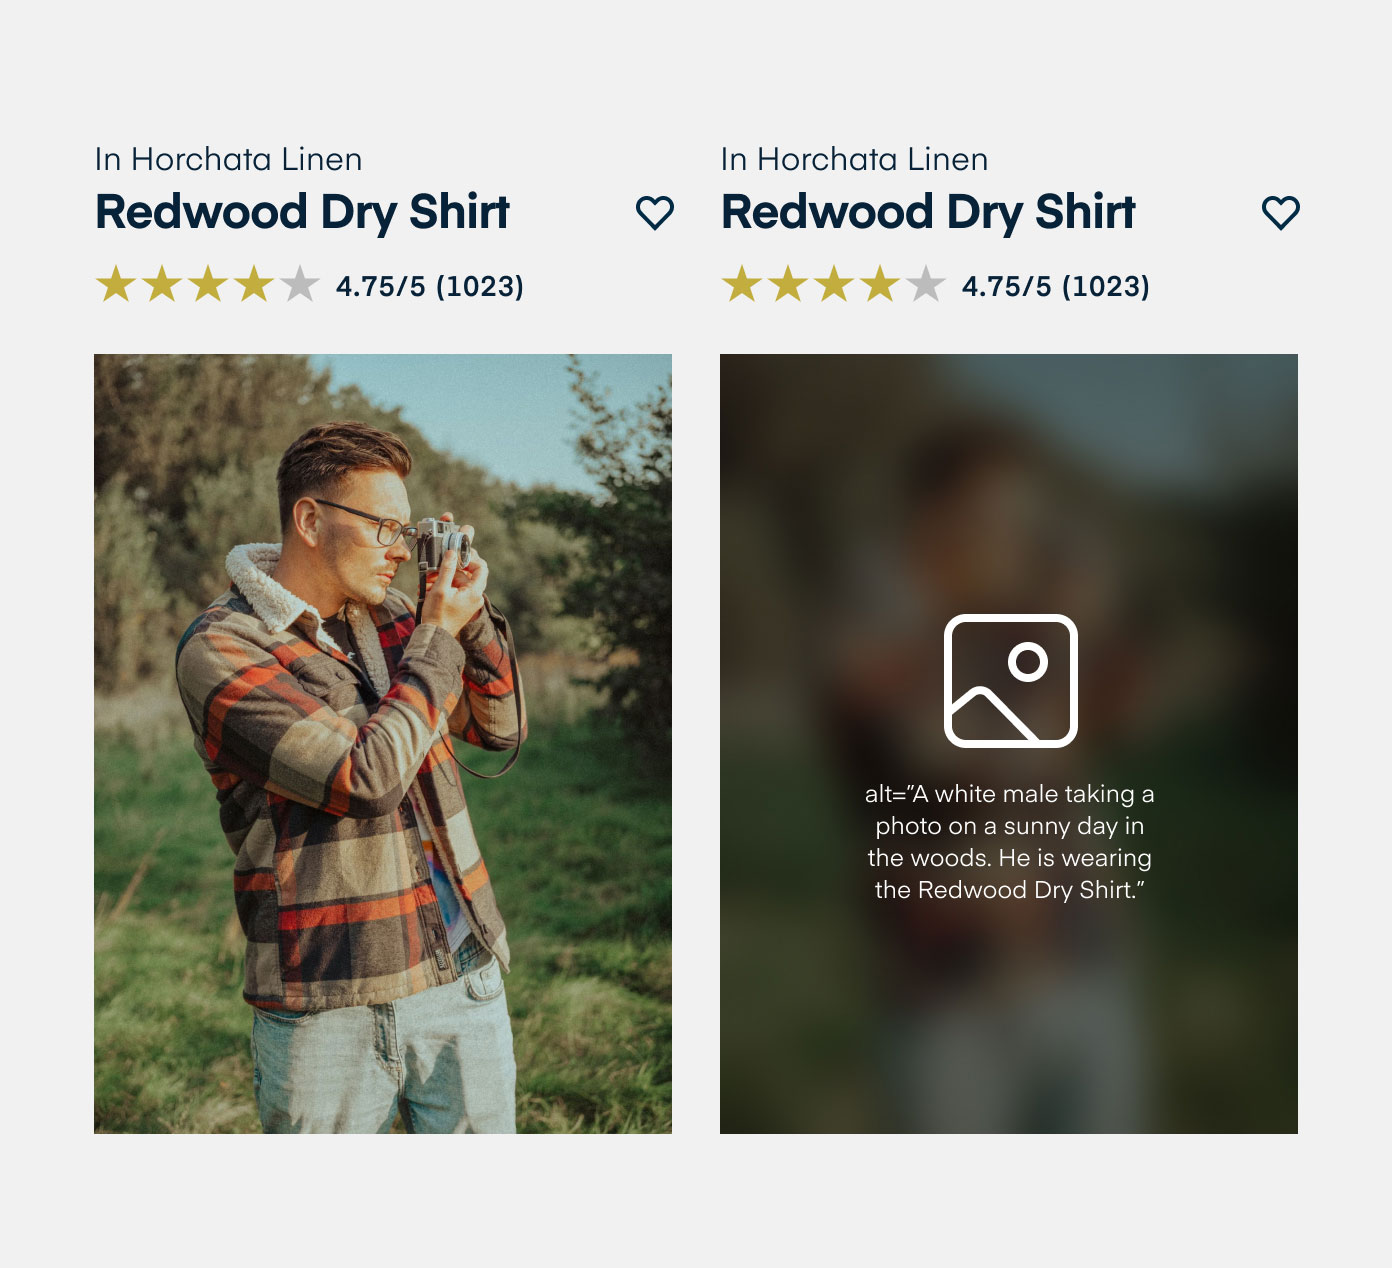 Example of writing alt text for an image. The image shows a white male taking a photo on a sunny day in the woods. He is wearing the Redwood Dry Shirt. The alt text annotation describes the image.